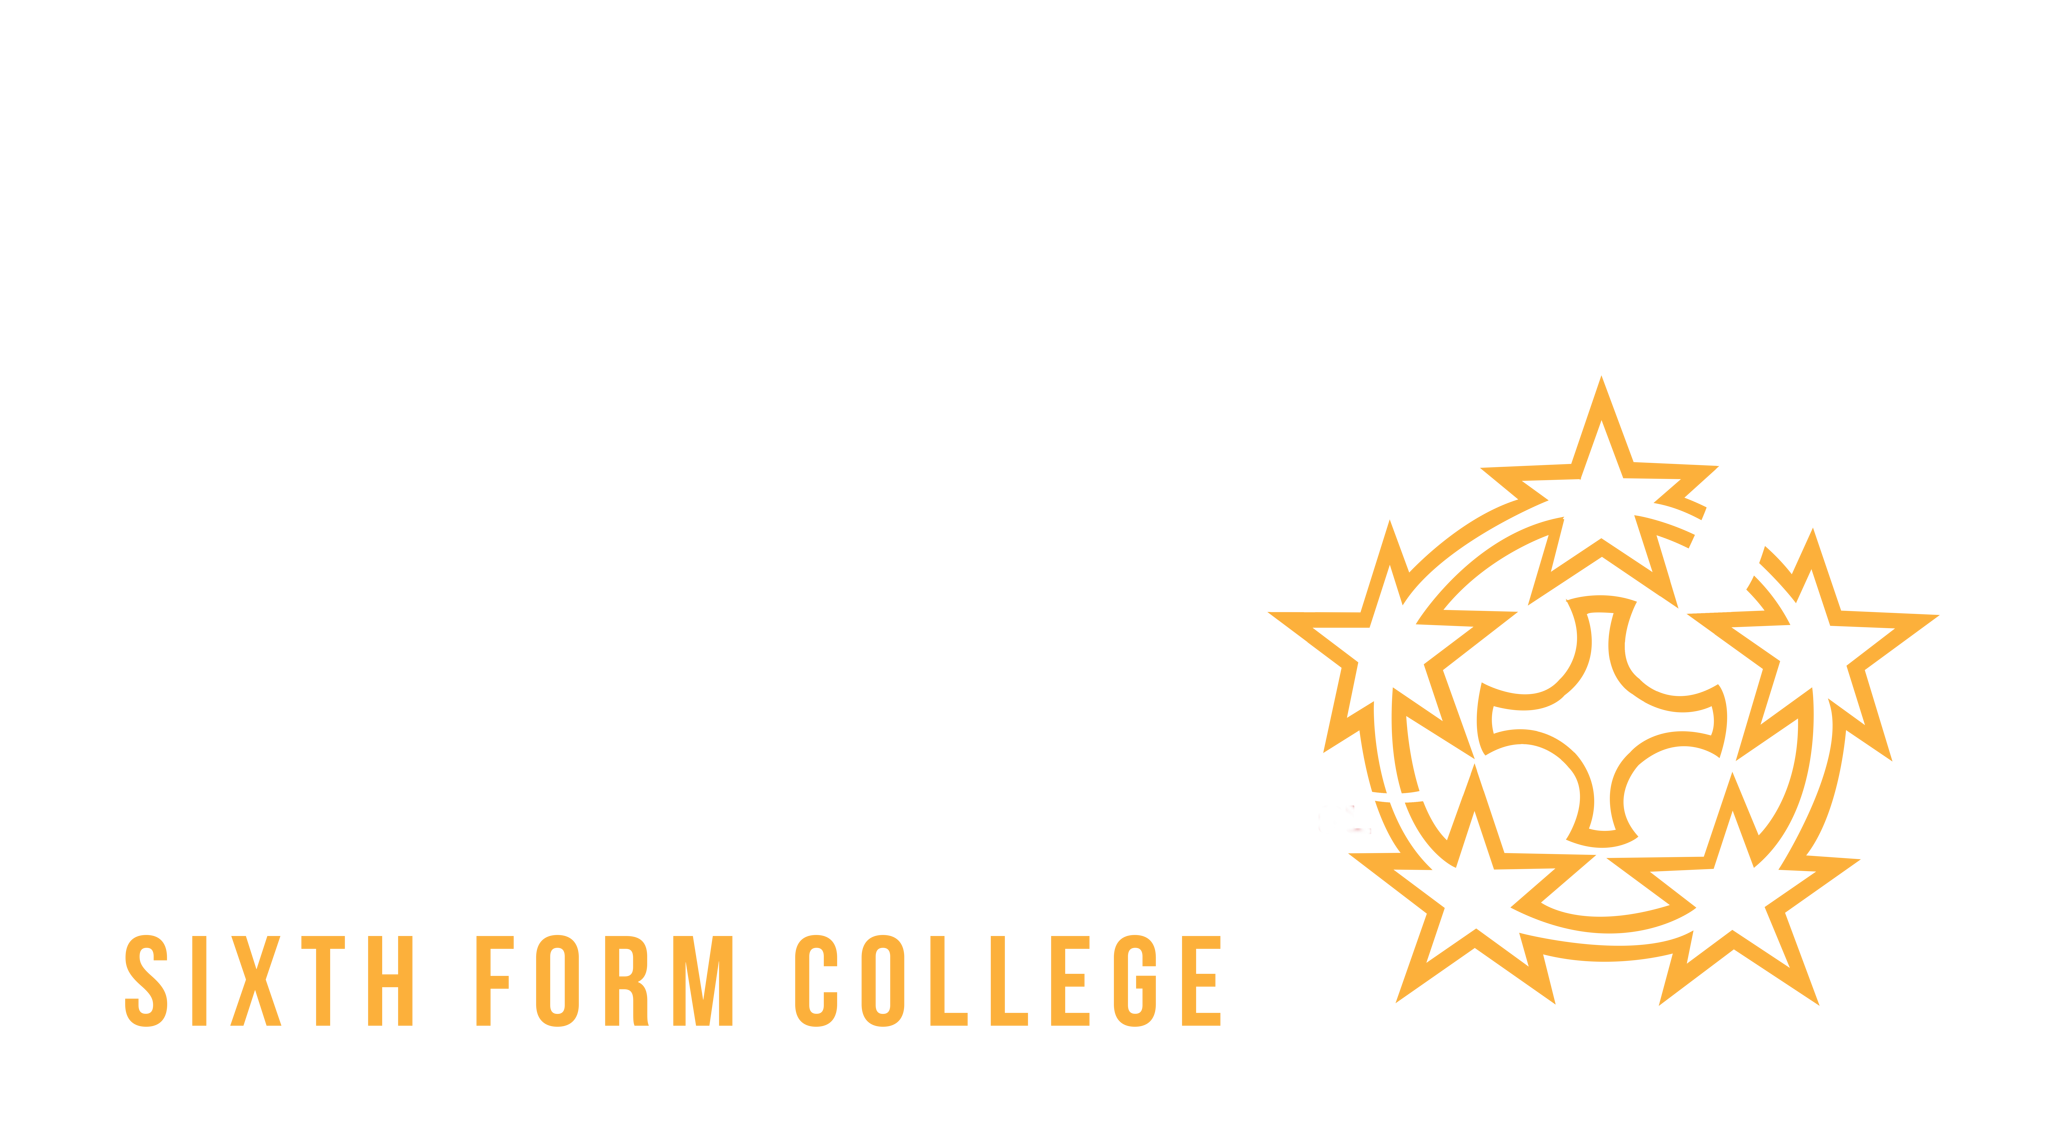 The English Martyrs Sixth Form College